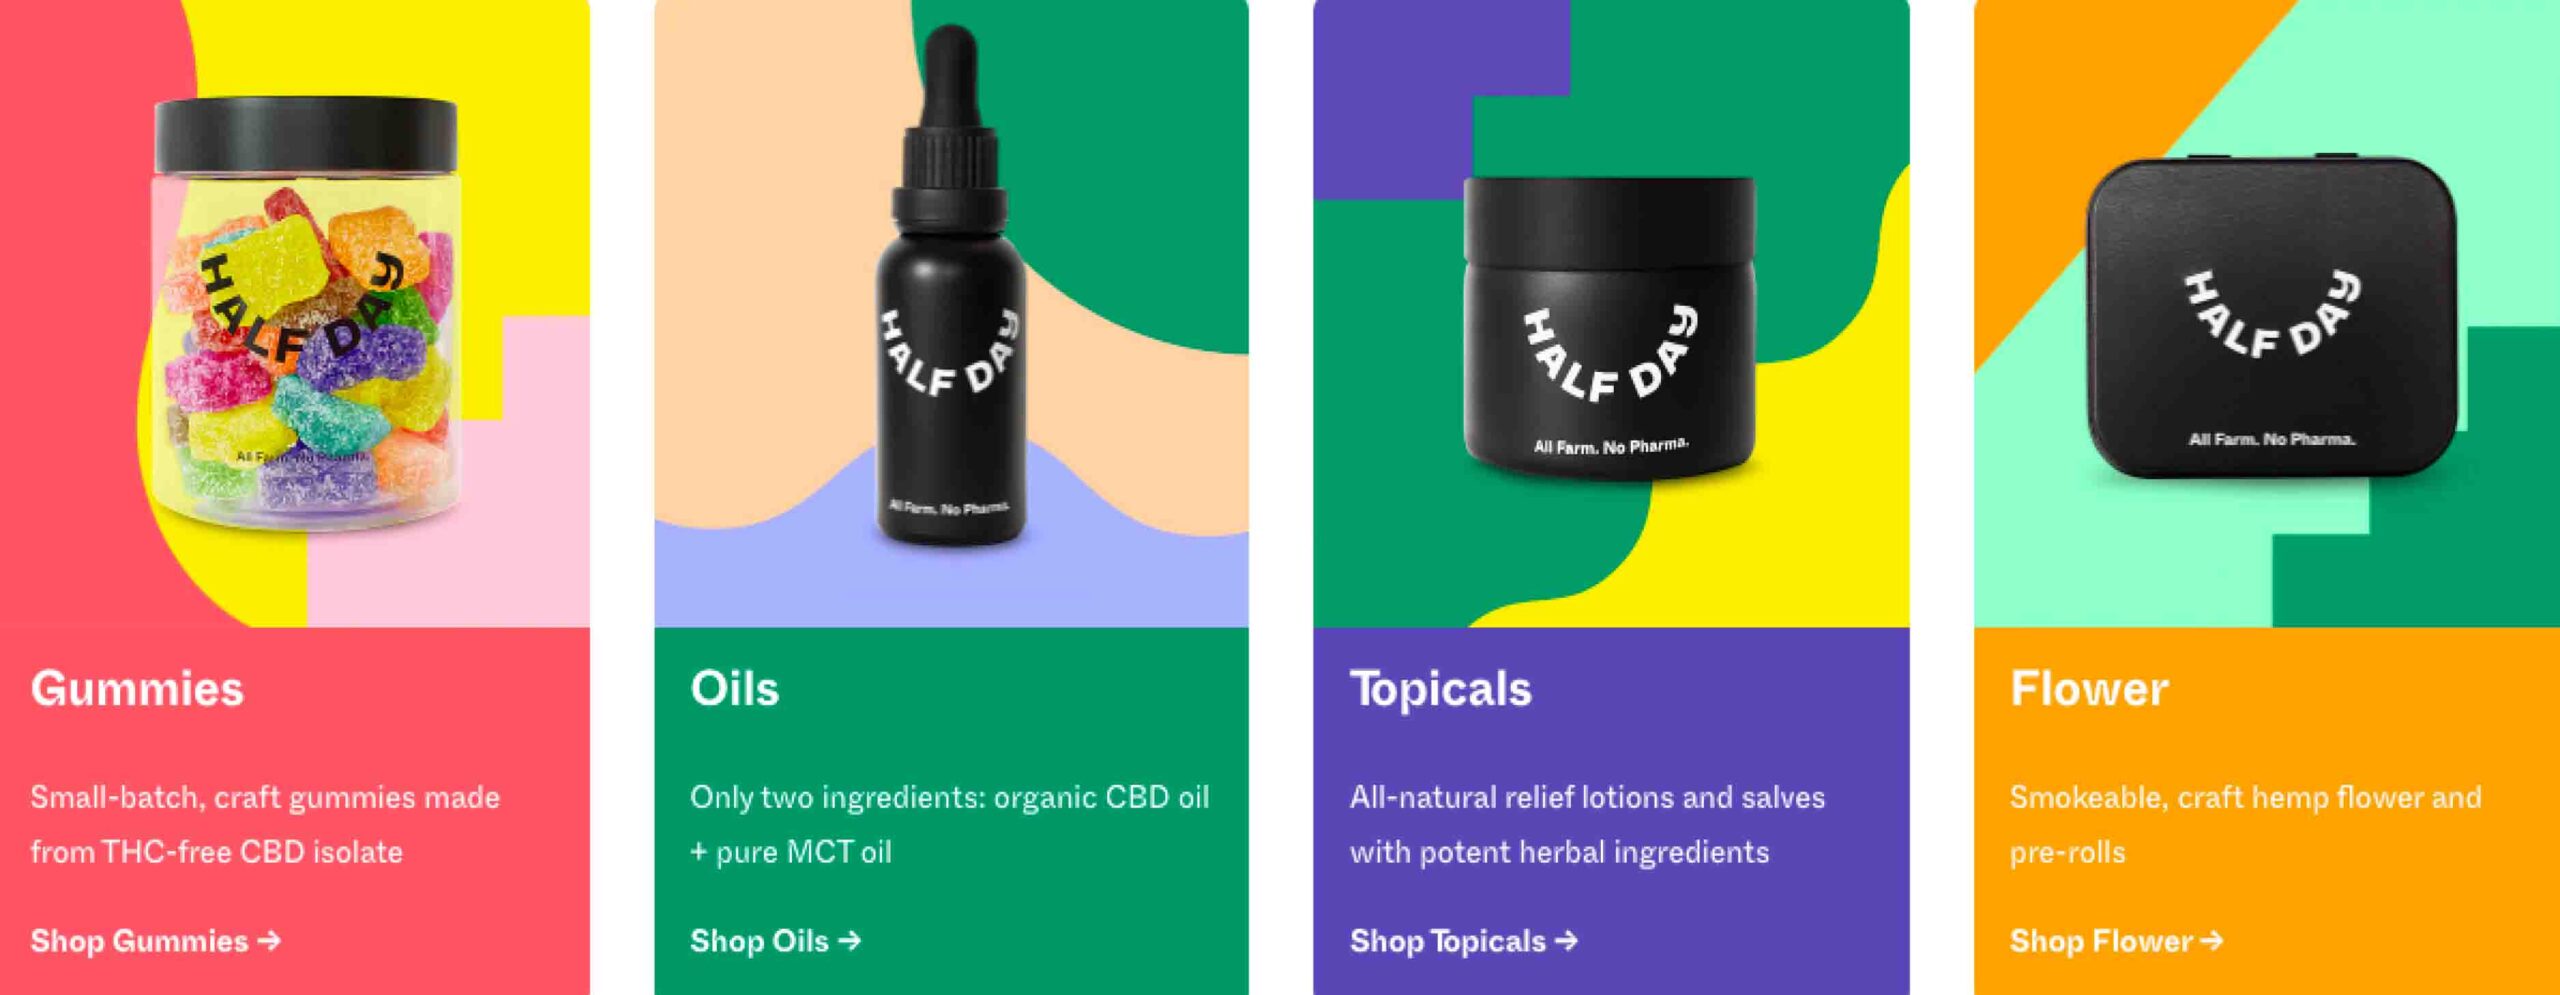 half-day-cbd-products-review